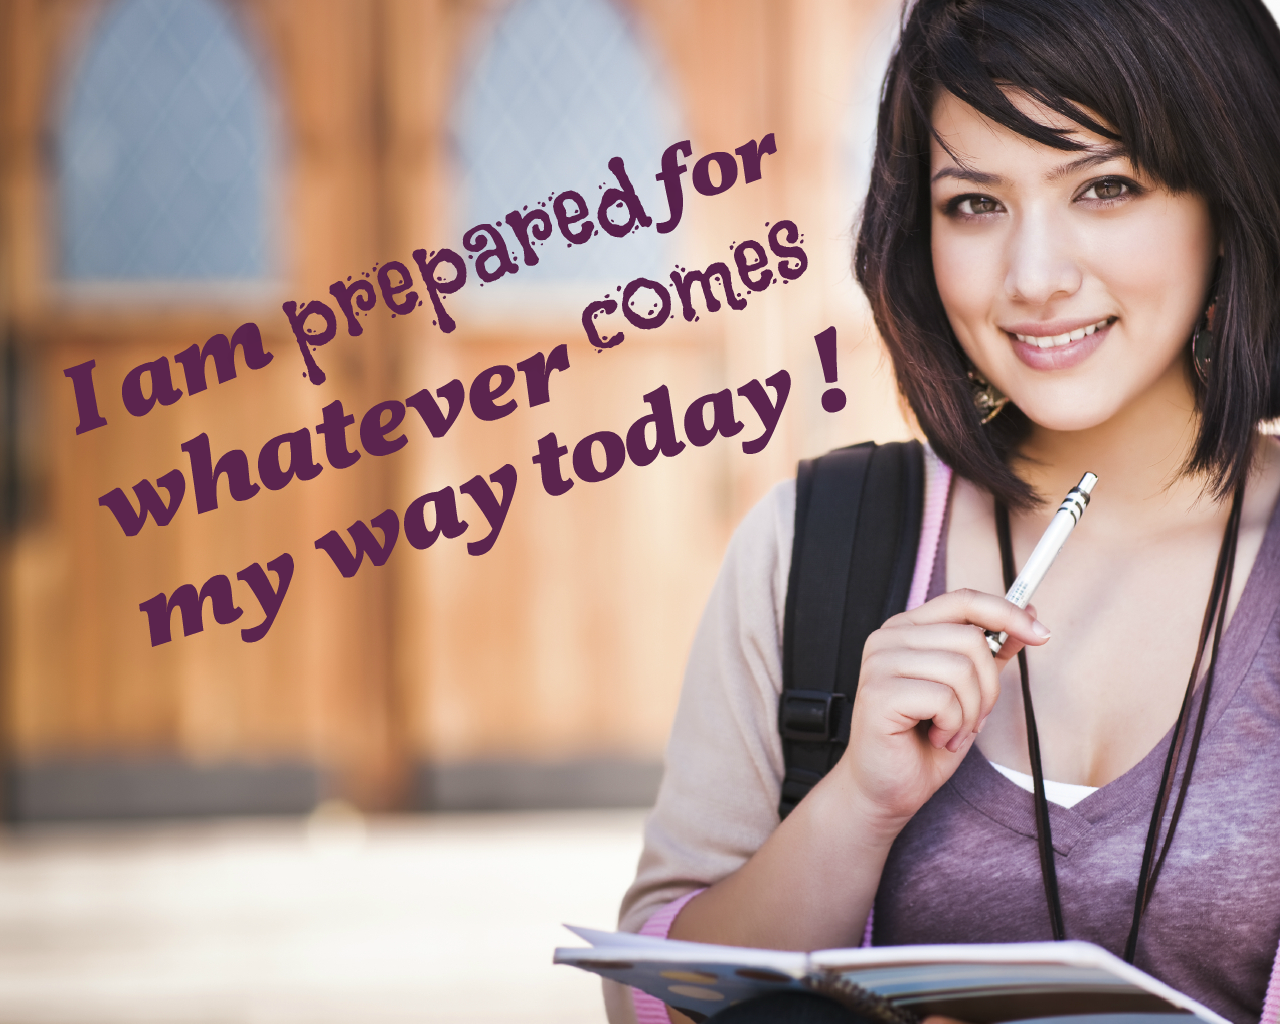 Powerful Affirmations for Students preparing for Exams.  Remove your Exam Fear with these Positive Affirmations. Desktop Exam Affirmations Wallpaper, Exam Affirmations